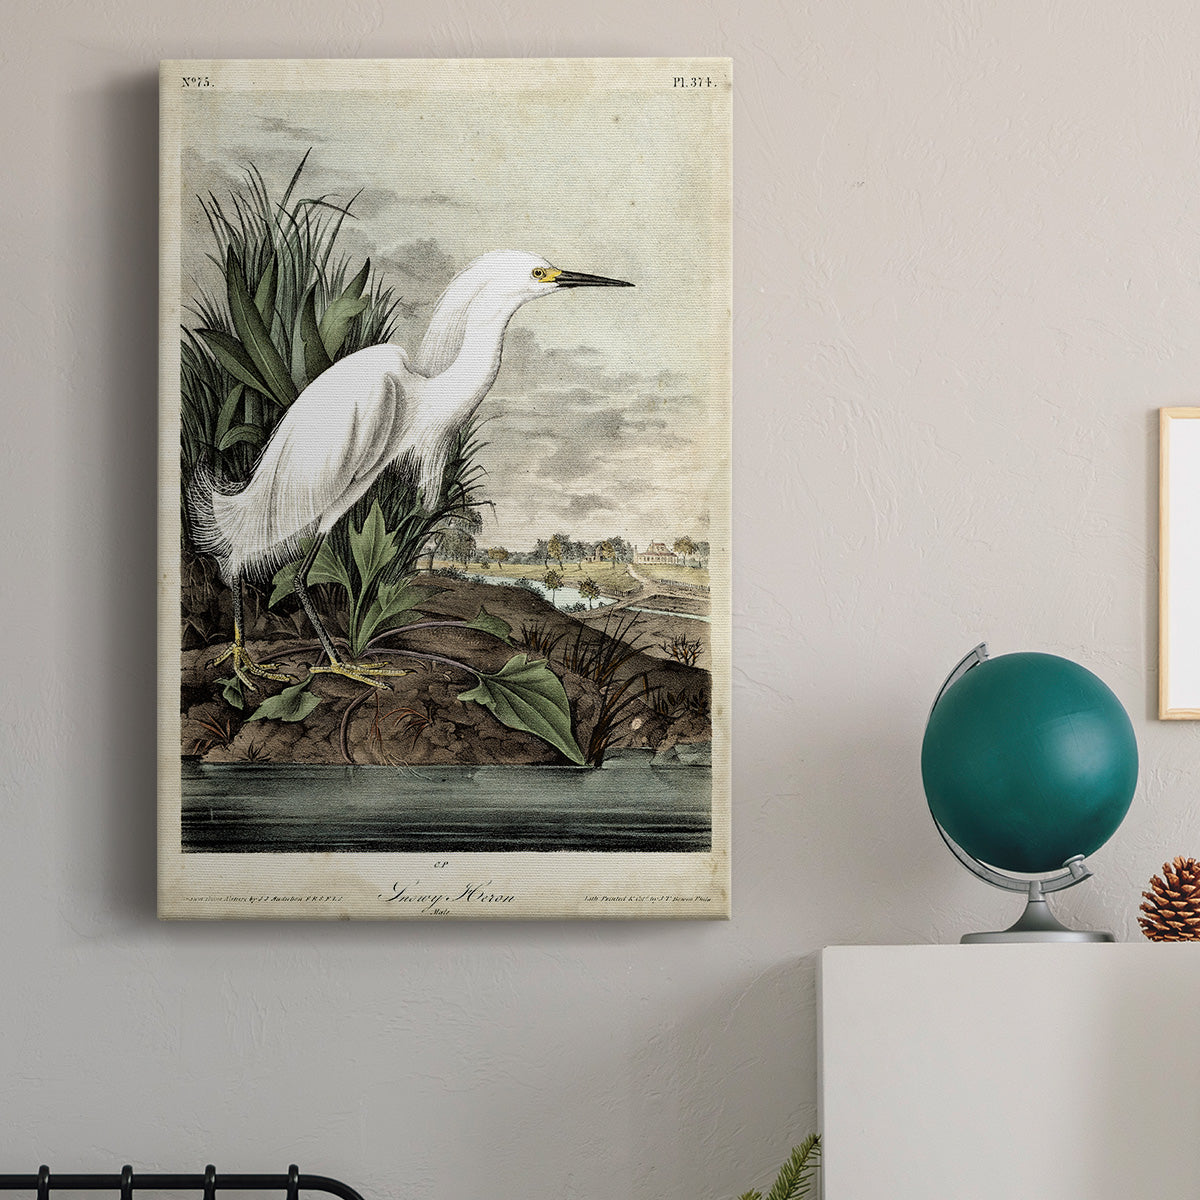 Snowy Heron Premium Gallery Wrapped Canvas - Ready to Hang